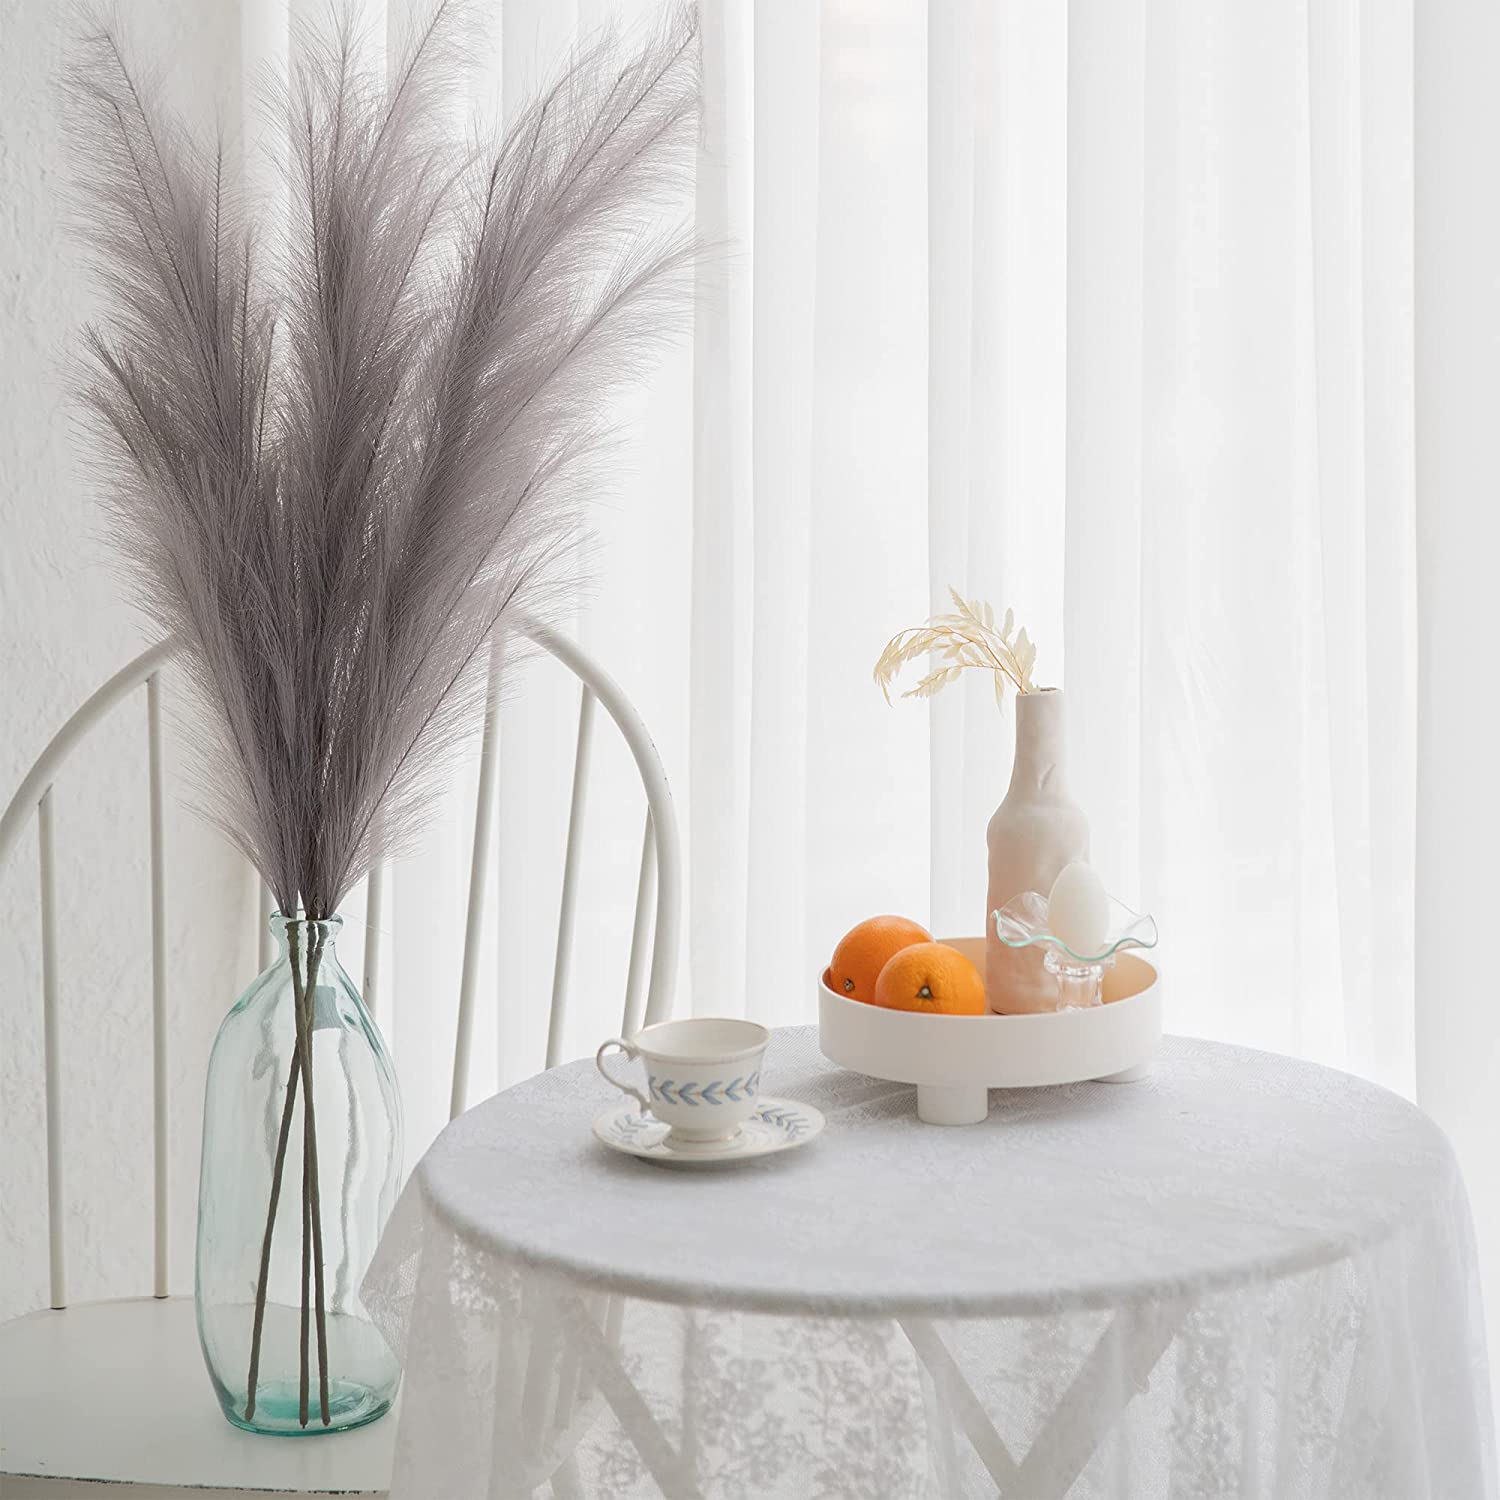 Faux Pampas Grass Large-3 Stems-45 inches | Yedwo Home